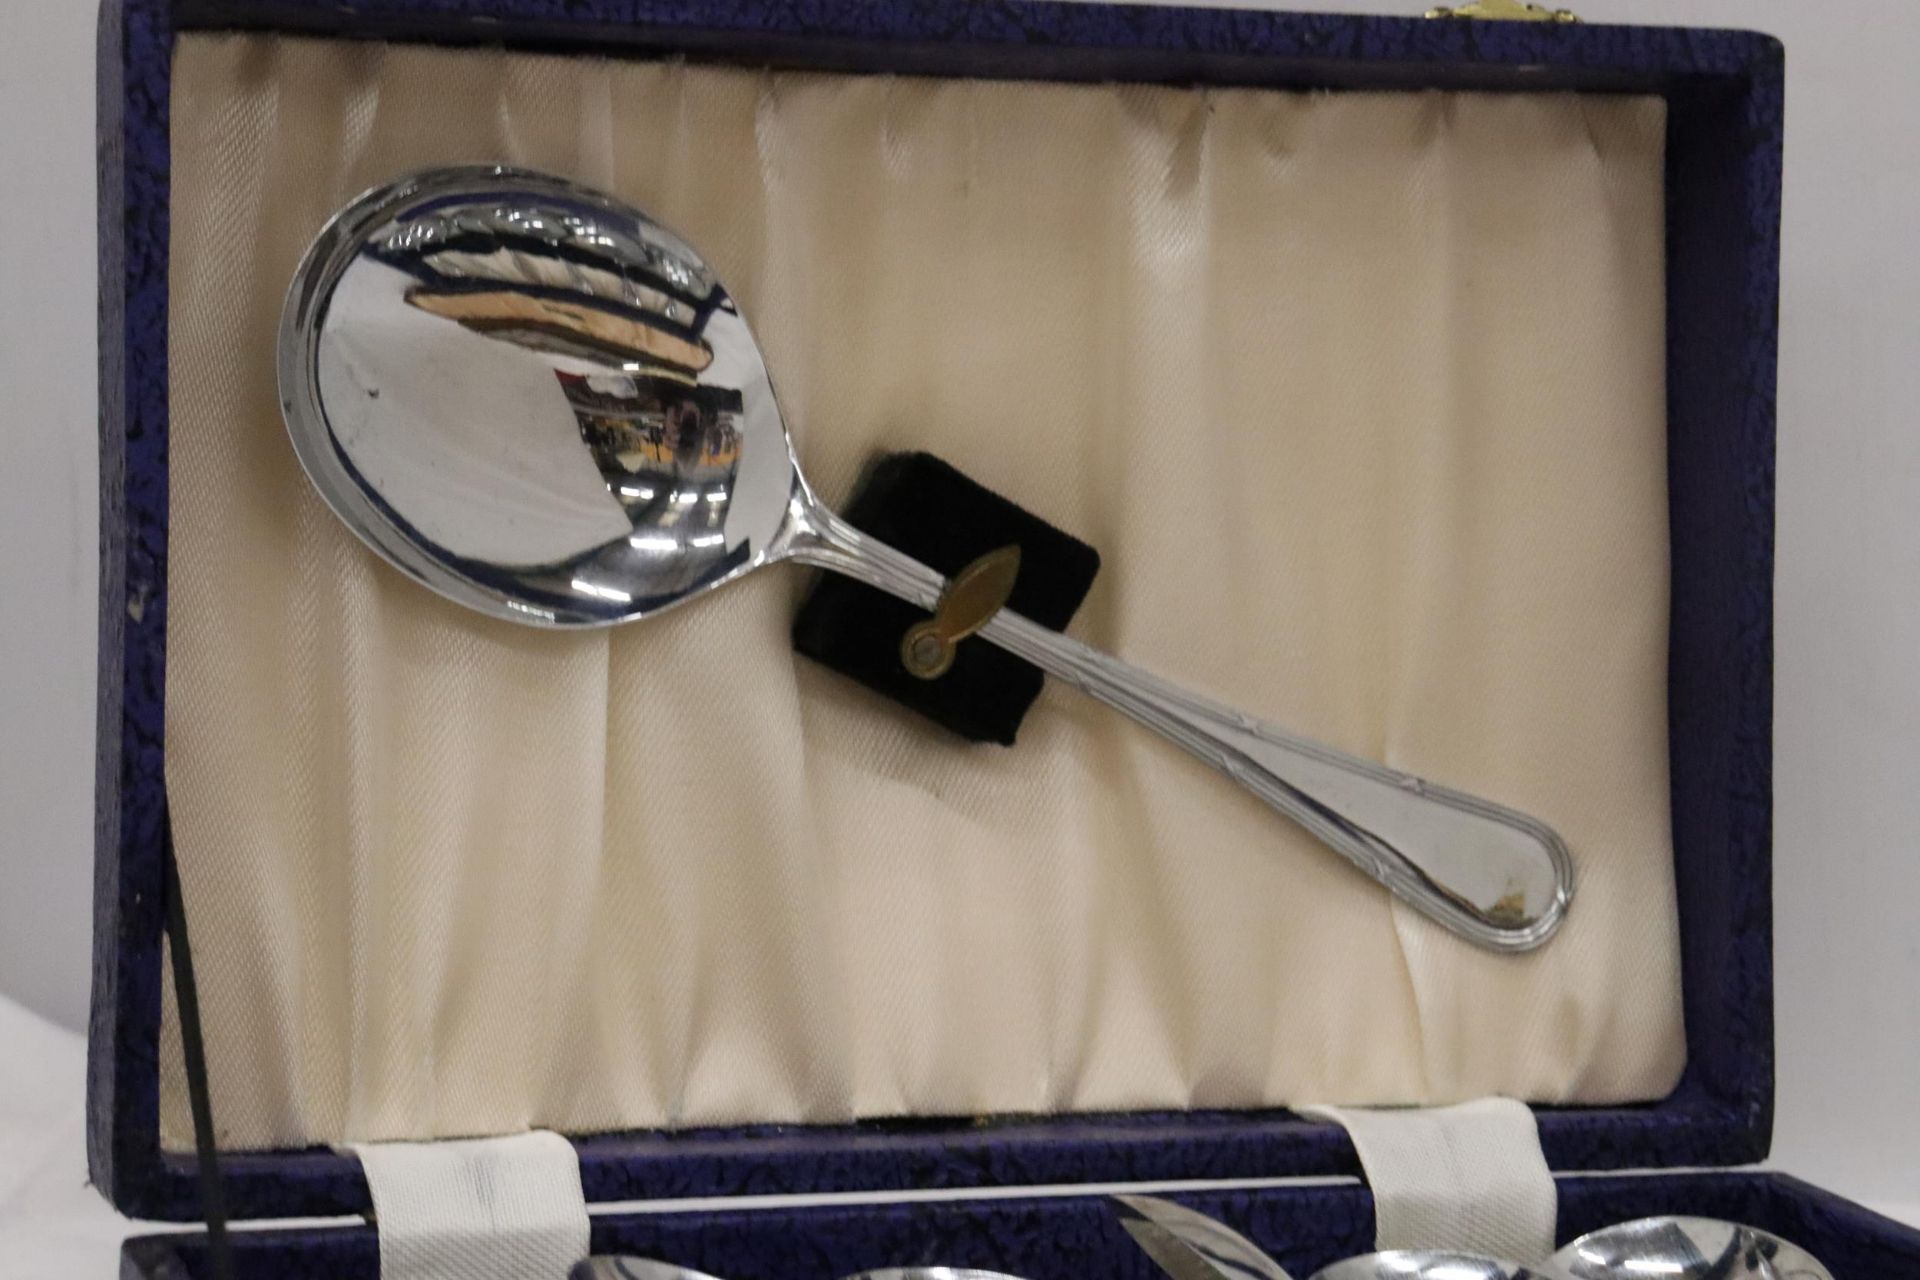 TWO VINTAGE BOXED SETS OF FLATWARE TO INCLUDE DESSERT SPOONS AND A CARVING SET - Image 5 of 6